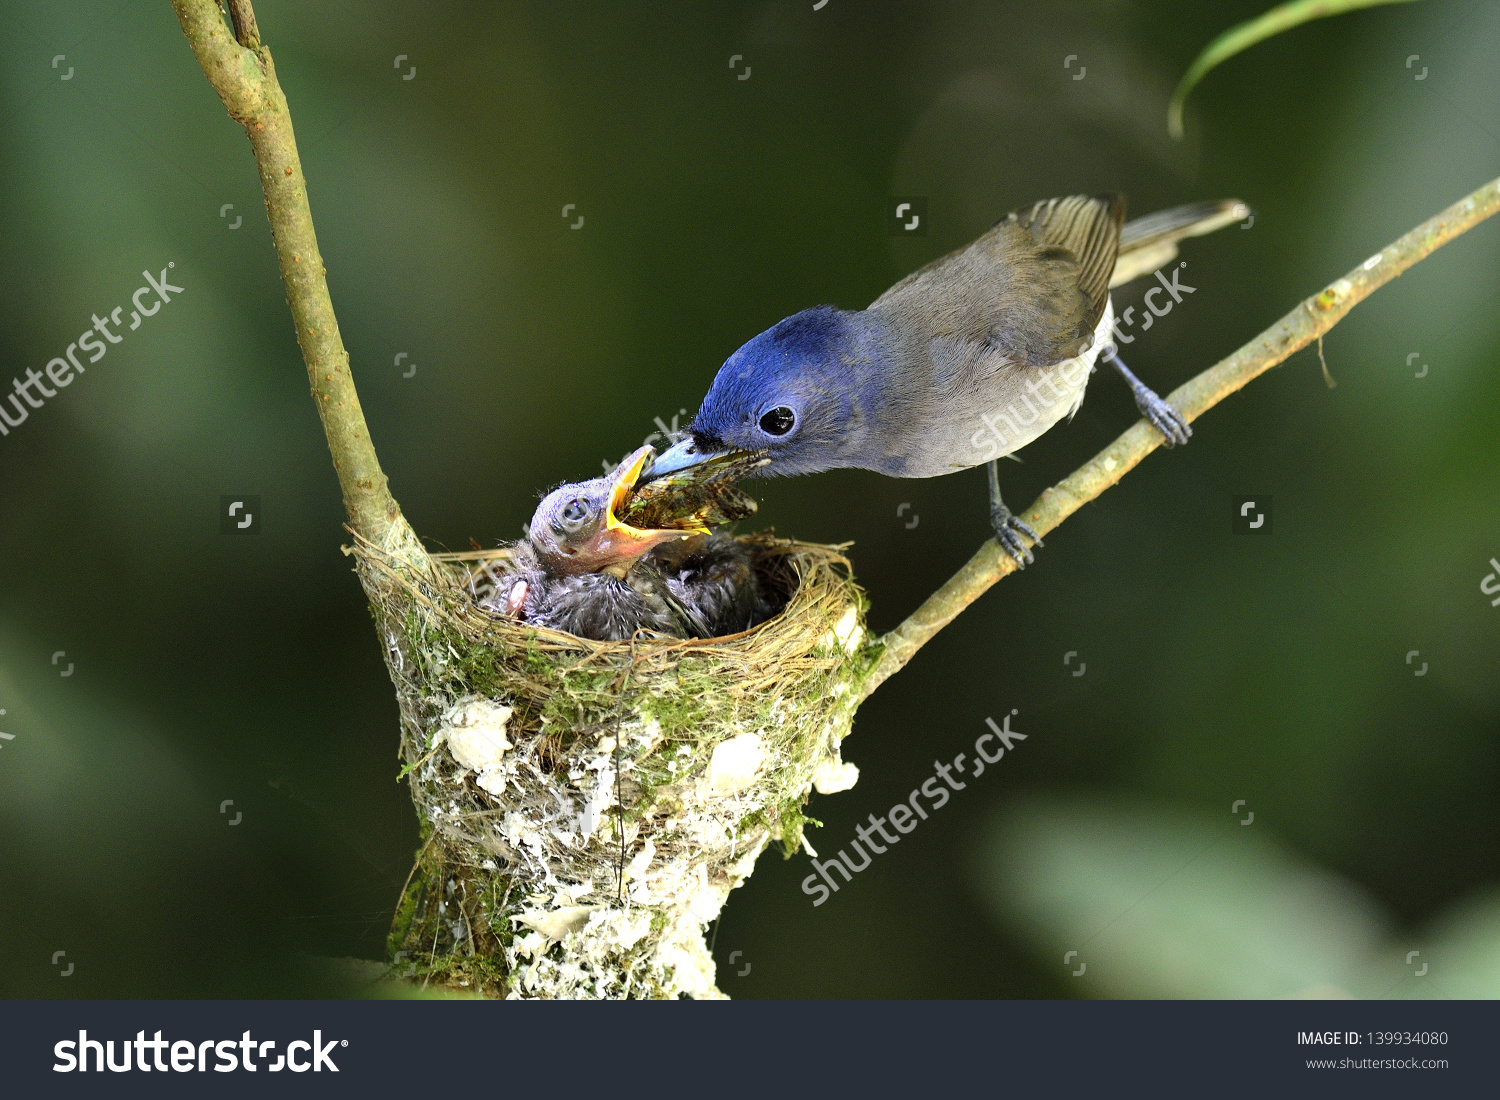 Black-naped Blue Monarch clipart #17, Download drawings